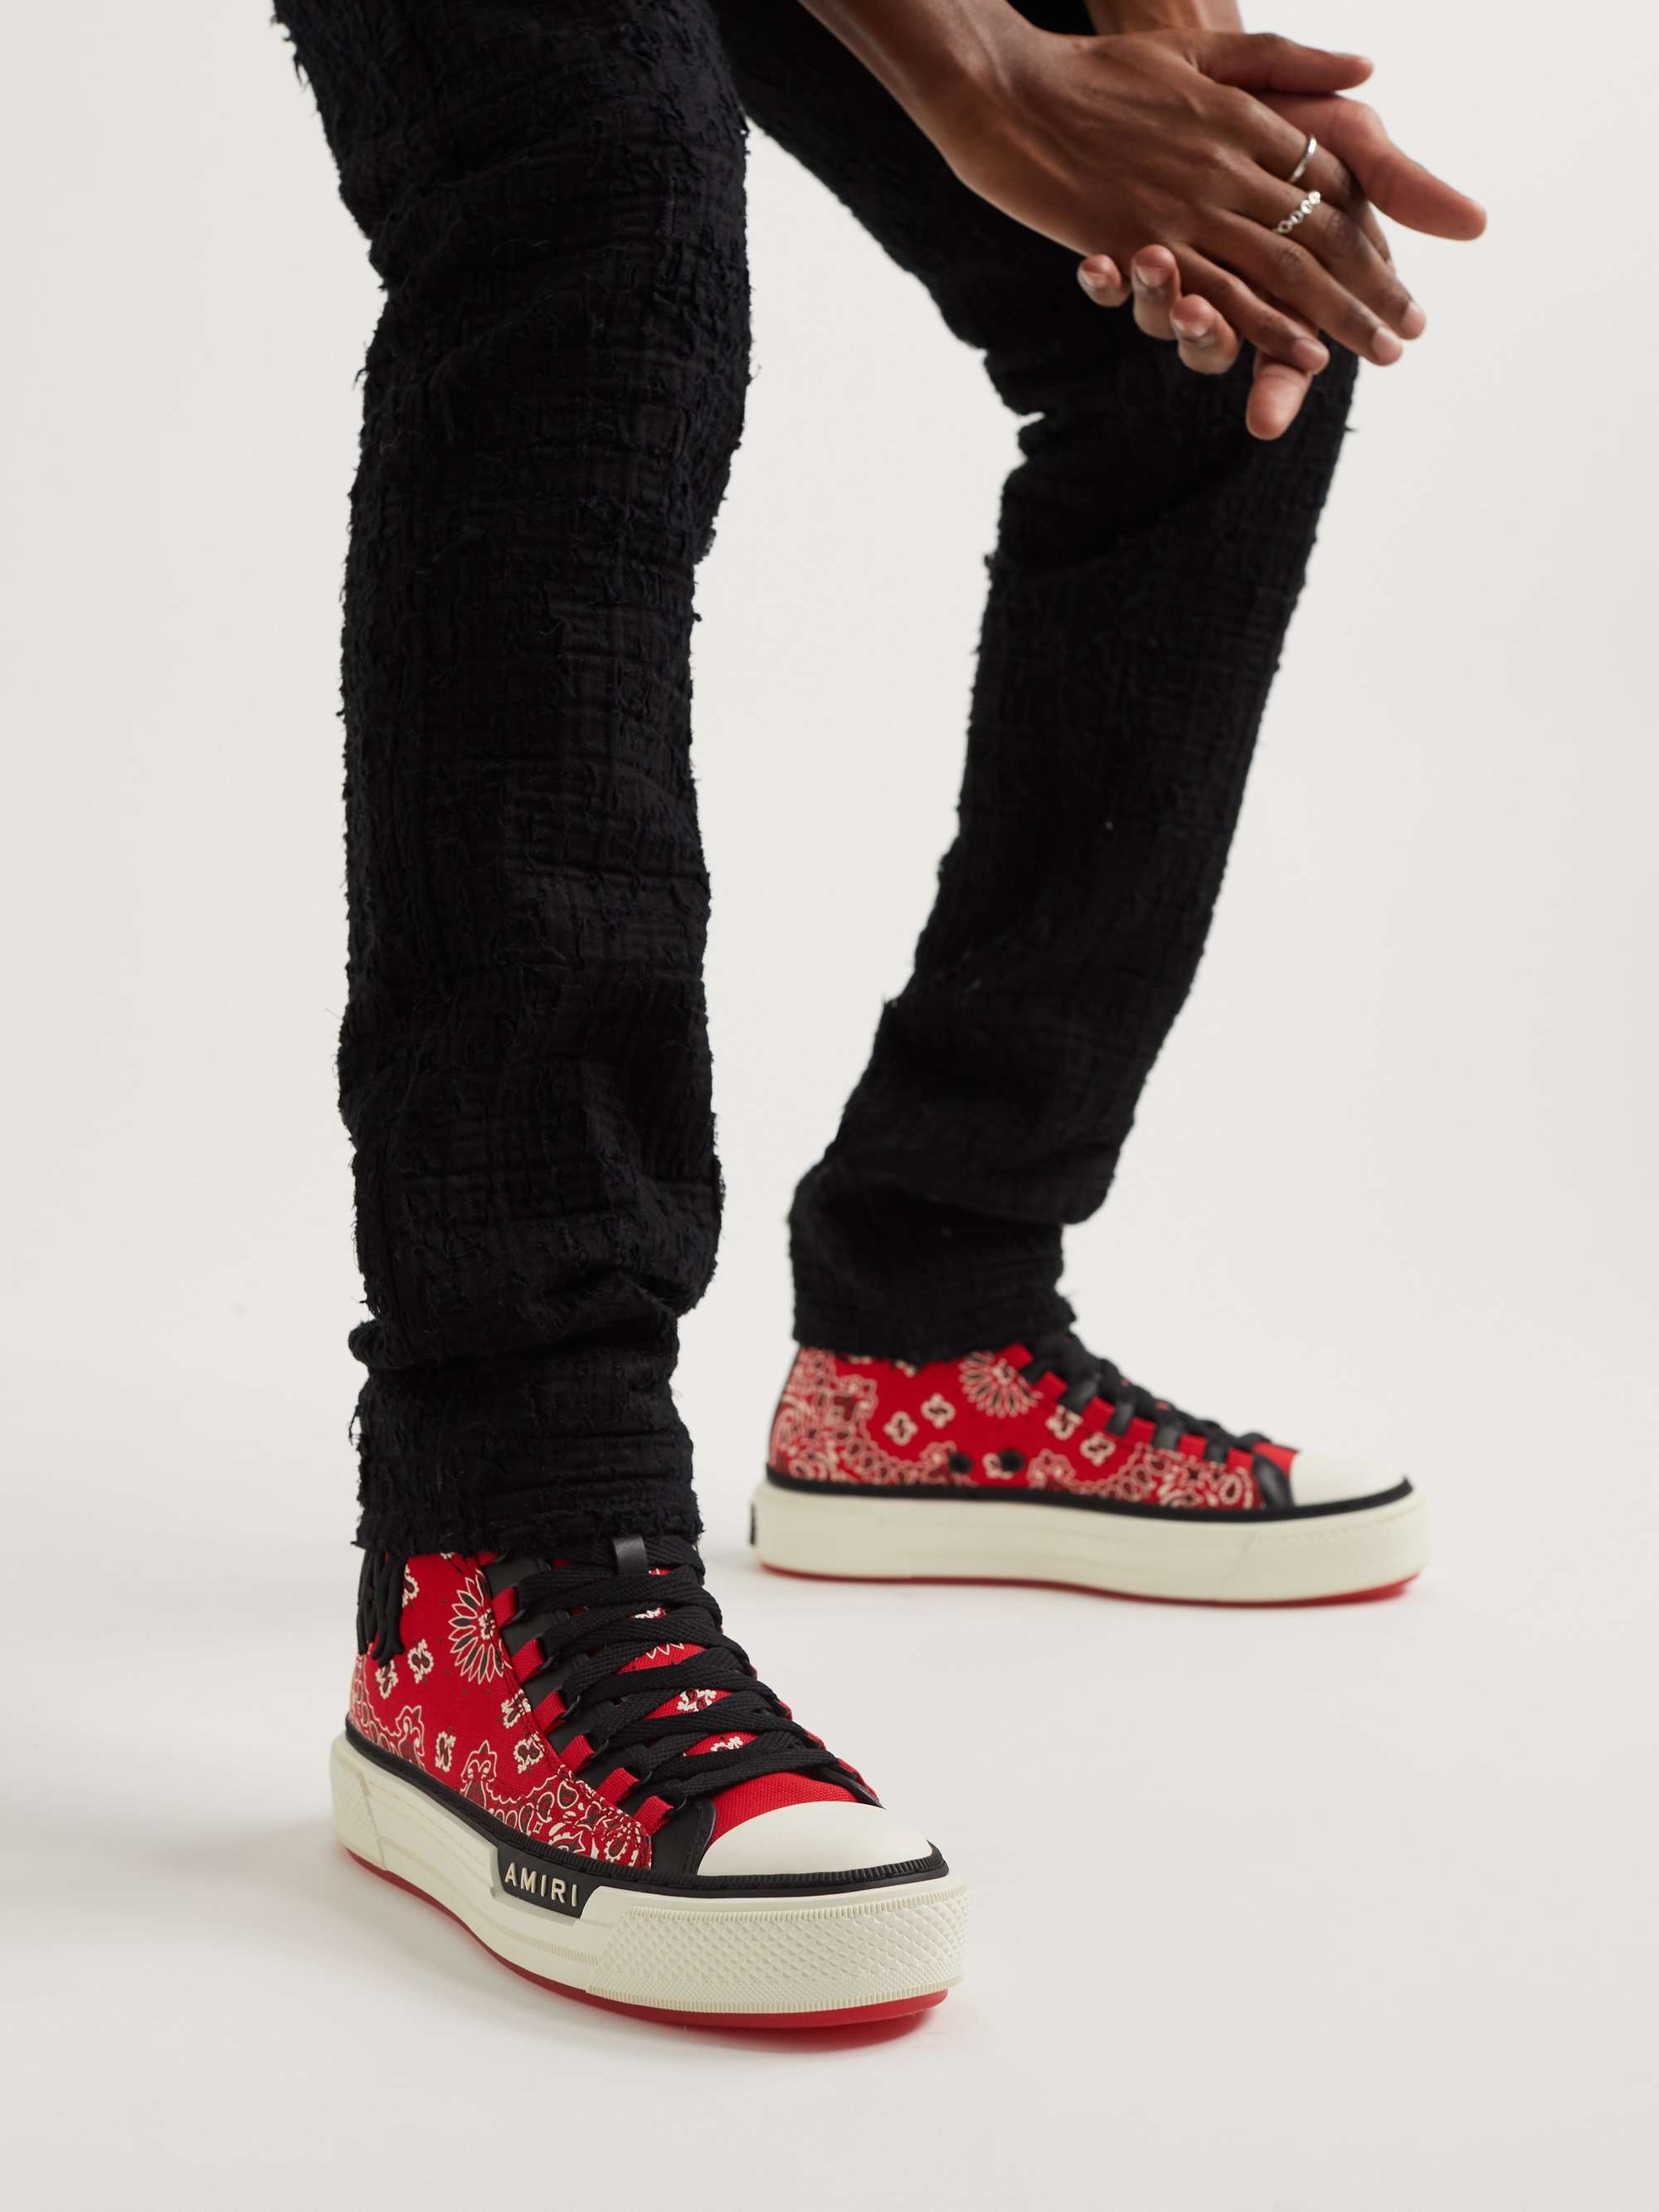 AMIRI Leather-Trimmed Paisley-Print Canvas High-Top Sneakers